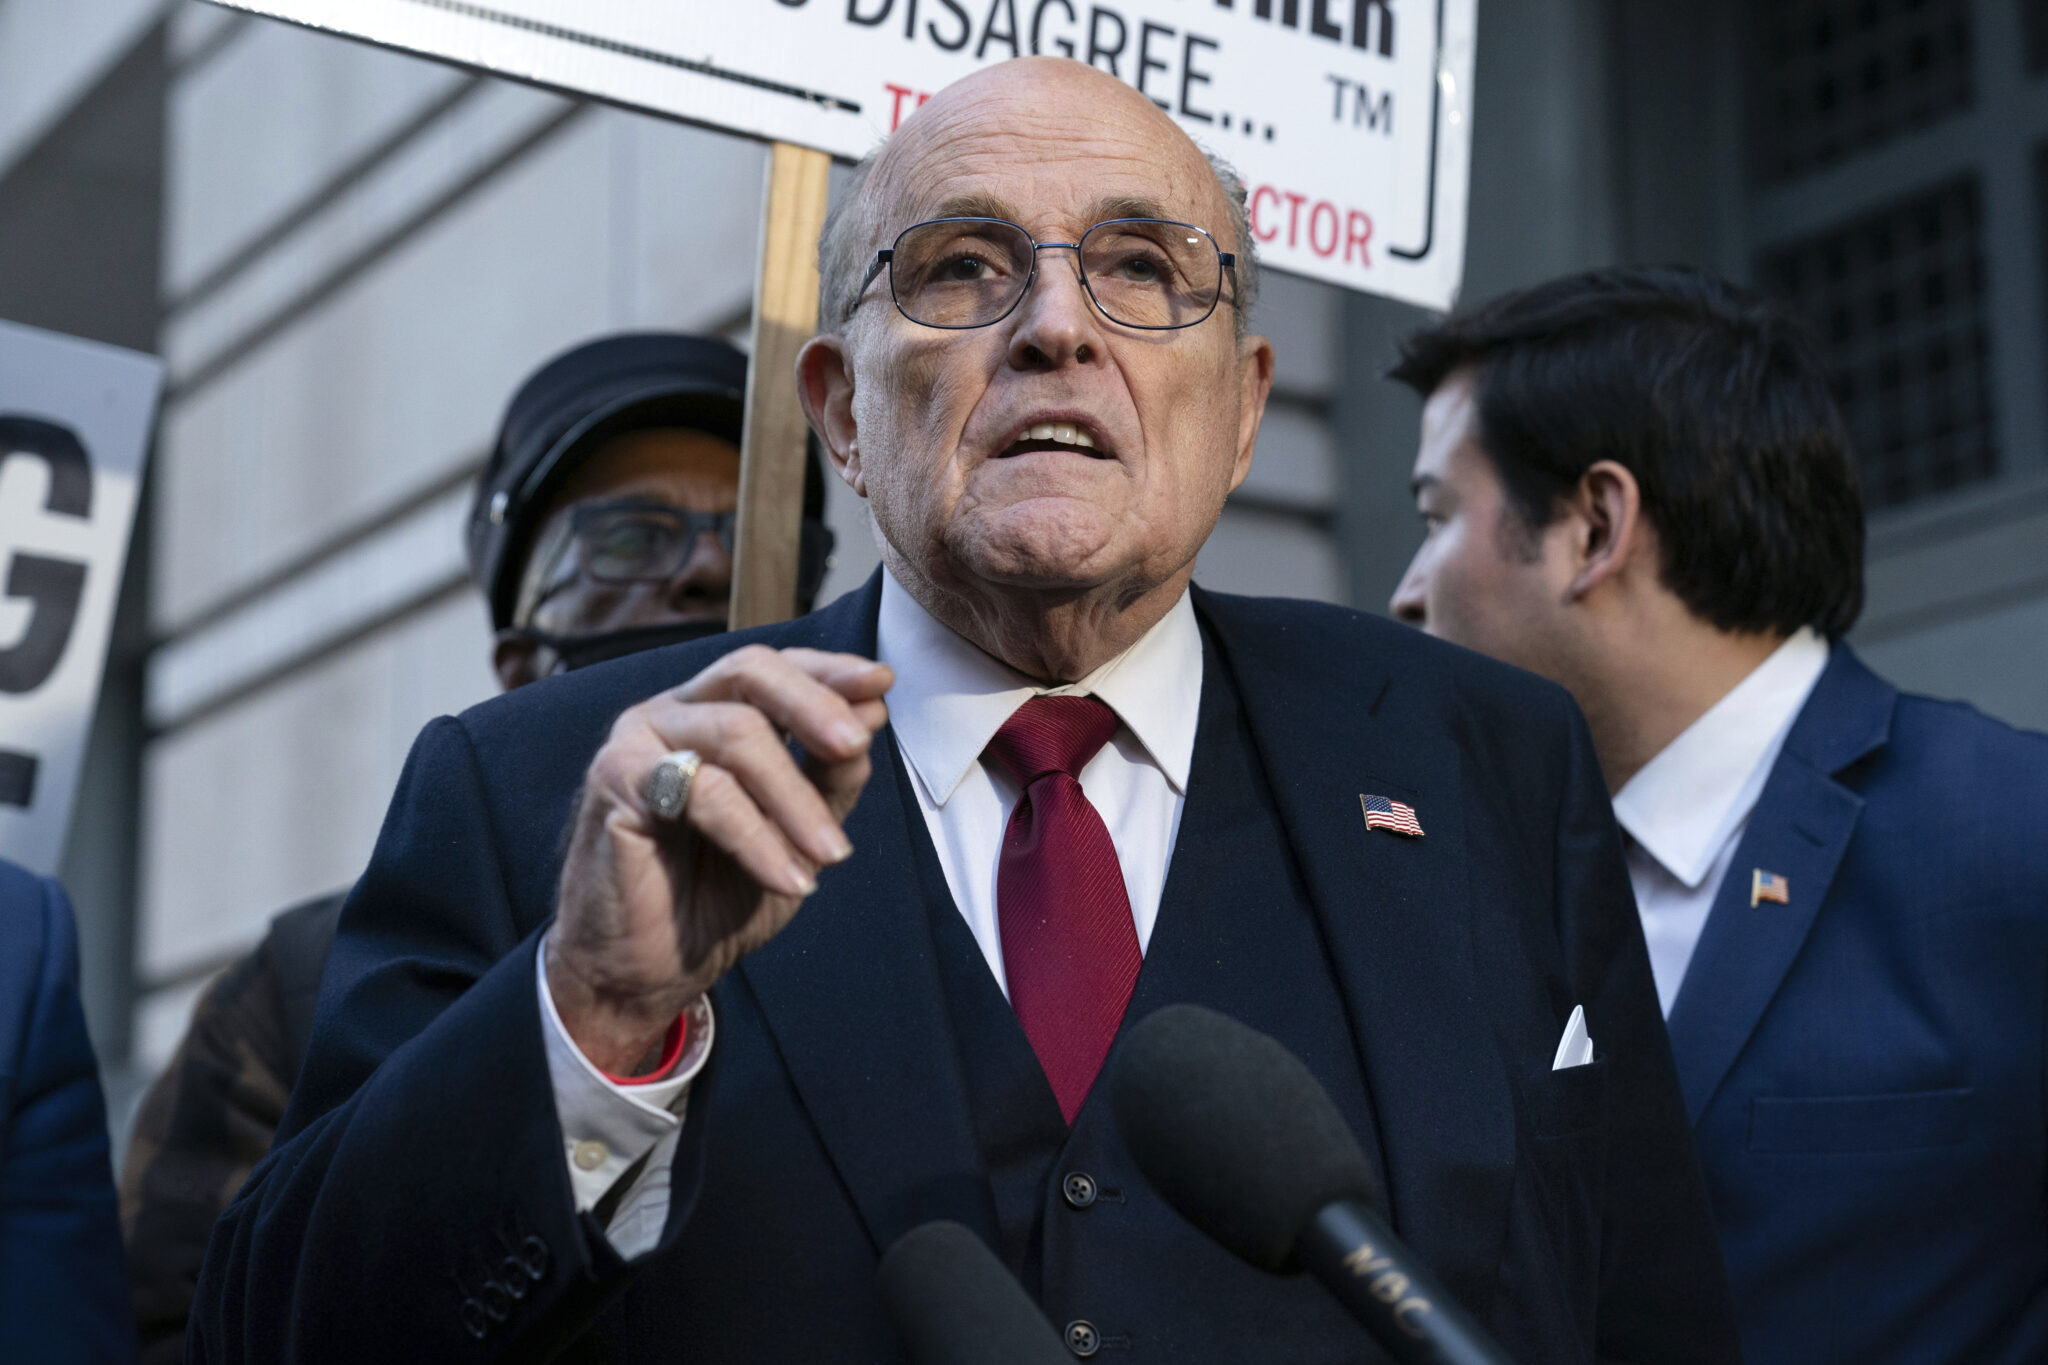 WABC Radio Suspends Rudy Giuliani for Flouting Ban on Discussing